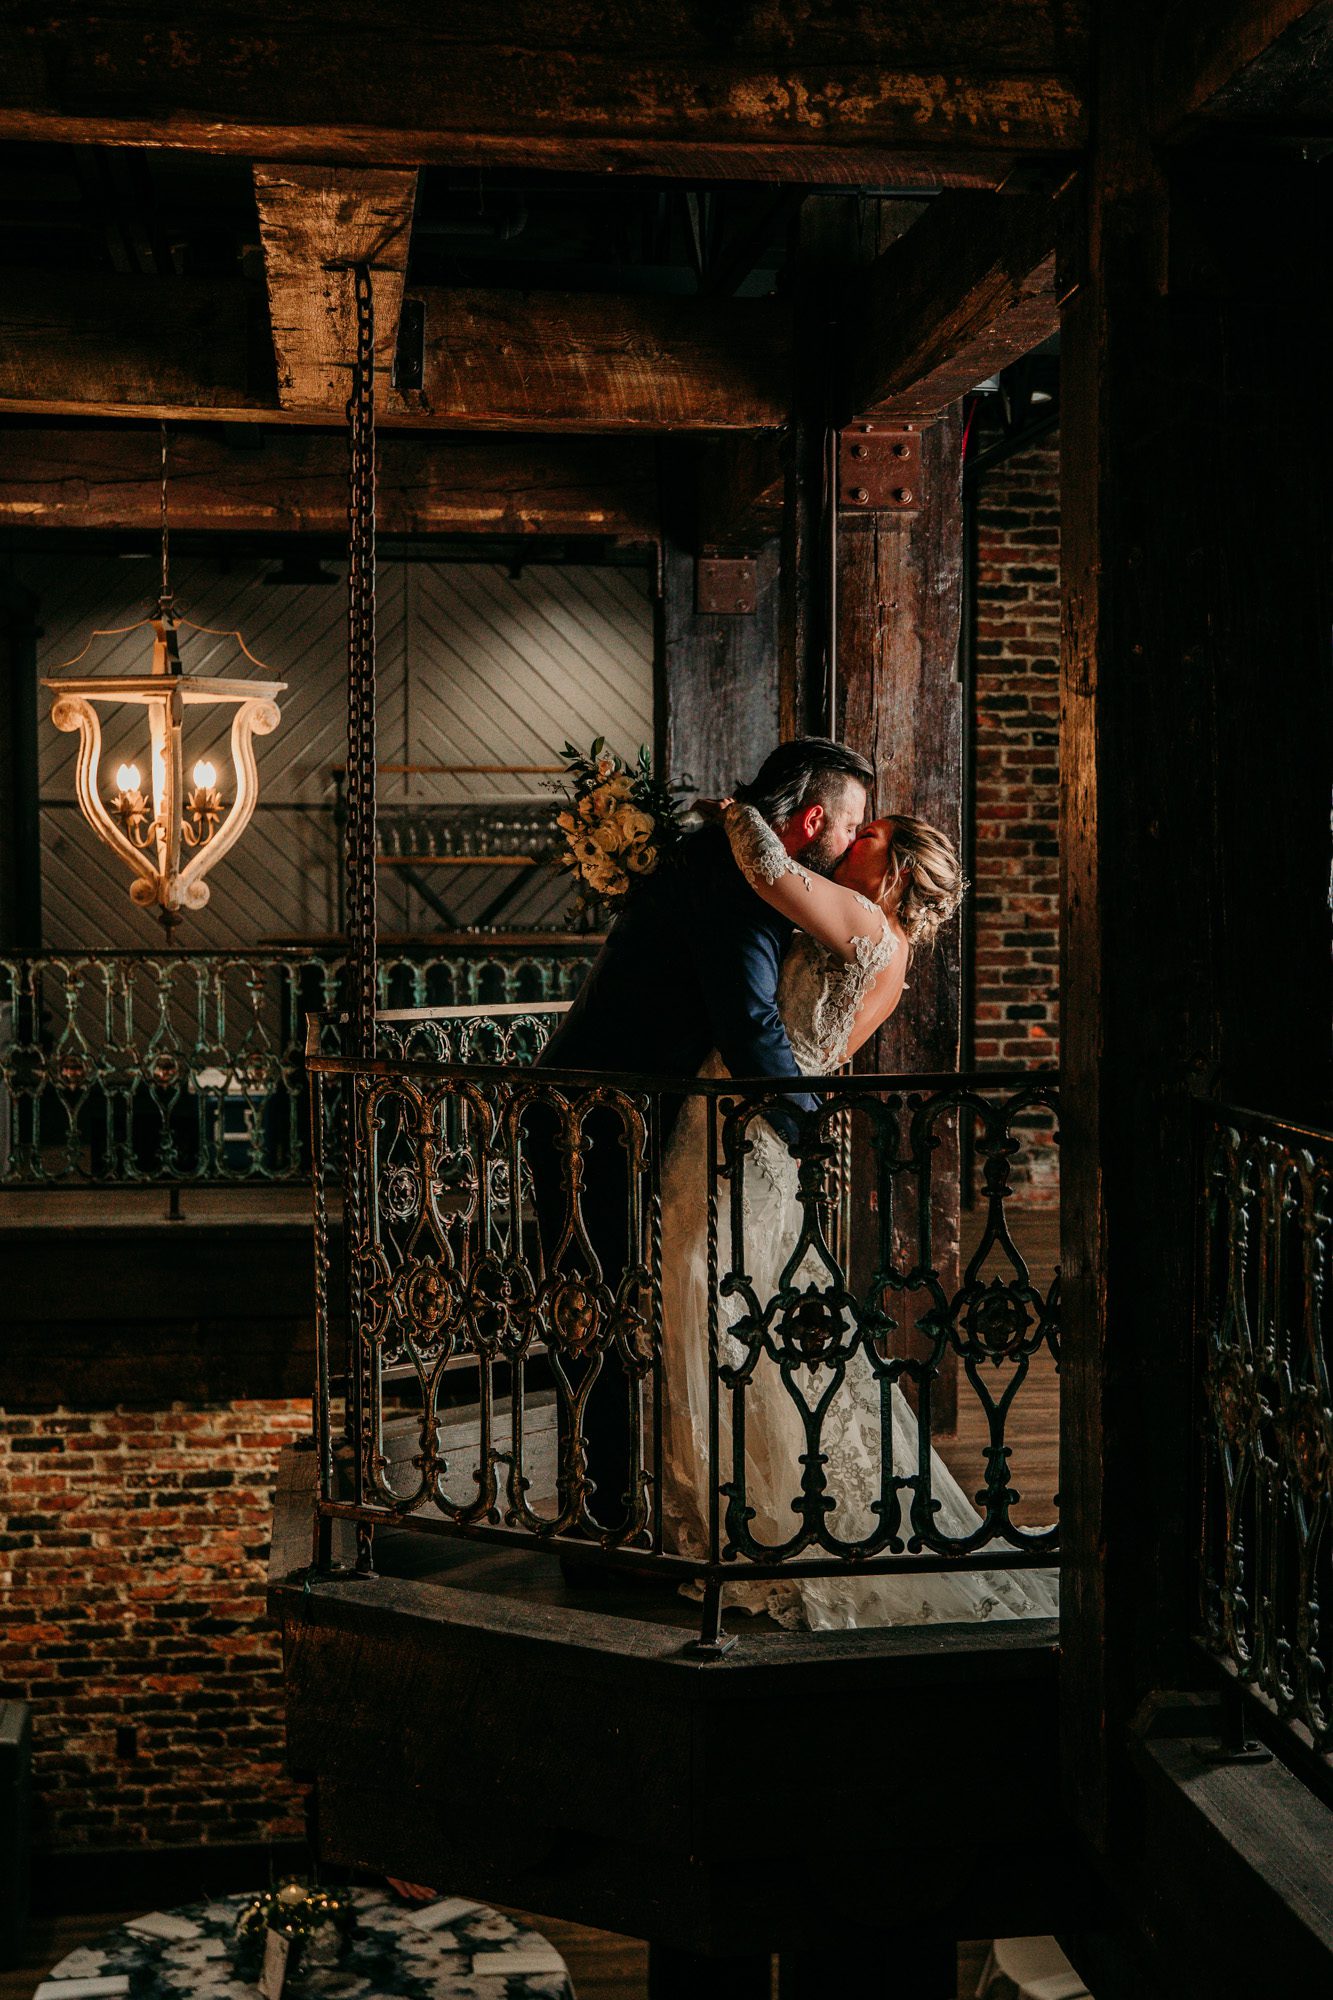 Bride and groom on balcony inside a vintage brick building old world charm at the Bedford event and wedding venue in Nashville TN. Photo by Krista Lee Photography